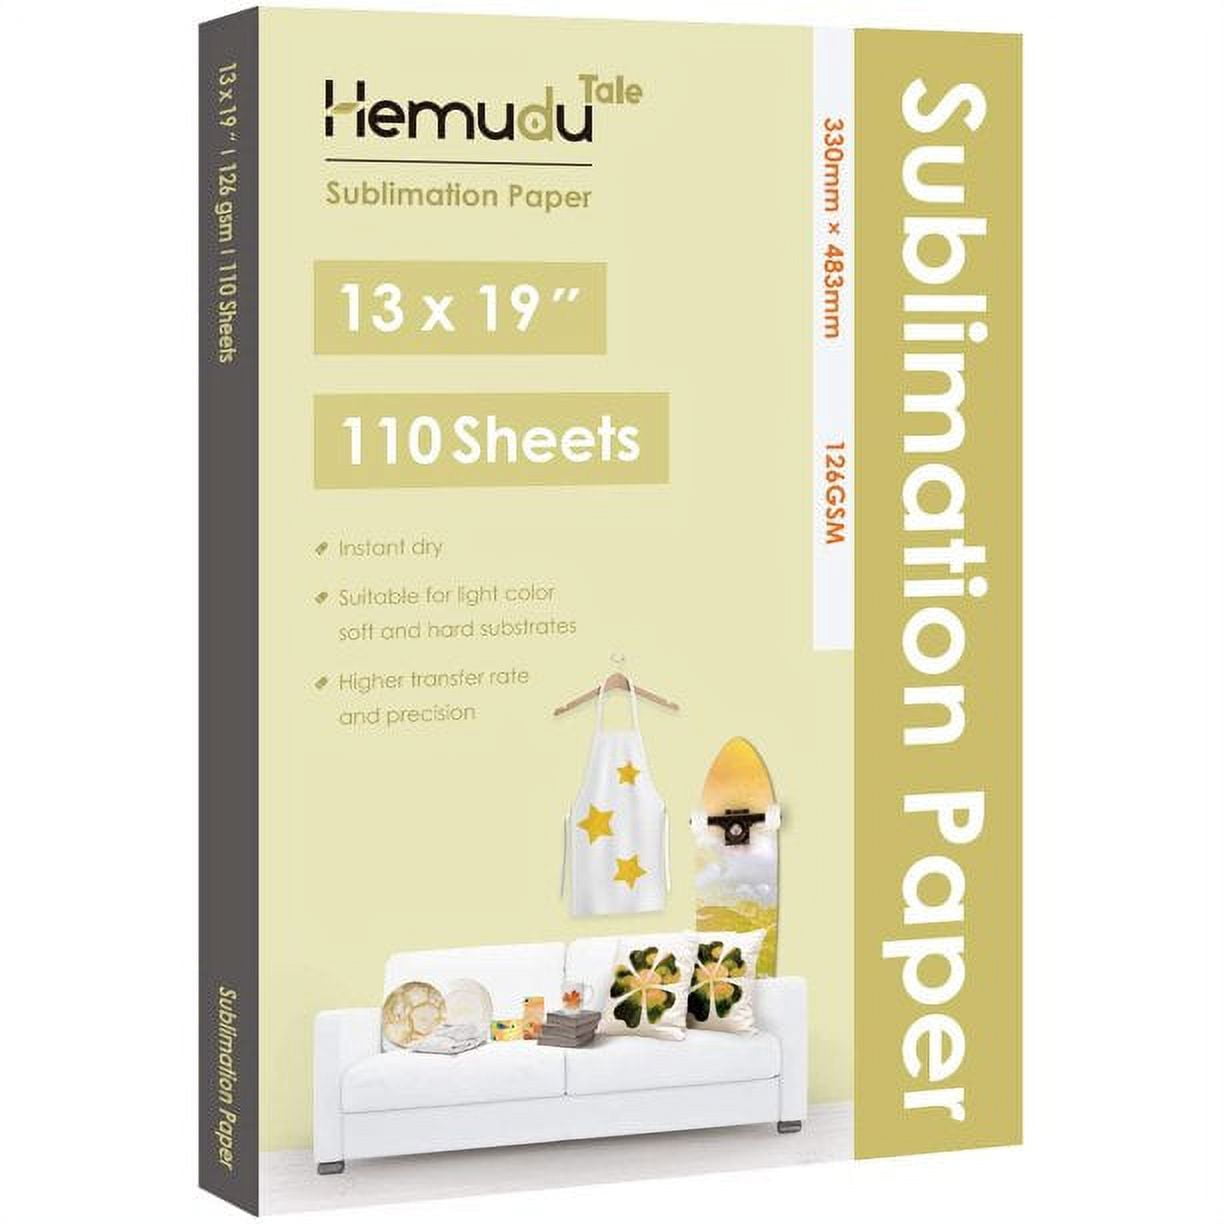 110 Sheets Sublimation Paper 13x19 inch for Epson Printers Heat Transfer  DIY Gift Compatible with Any Inkjet Printer with Sublimation Ink 